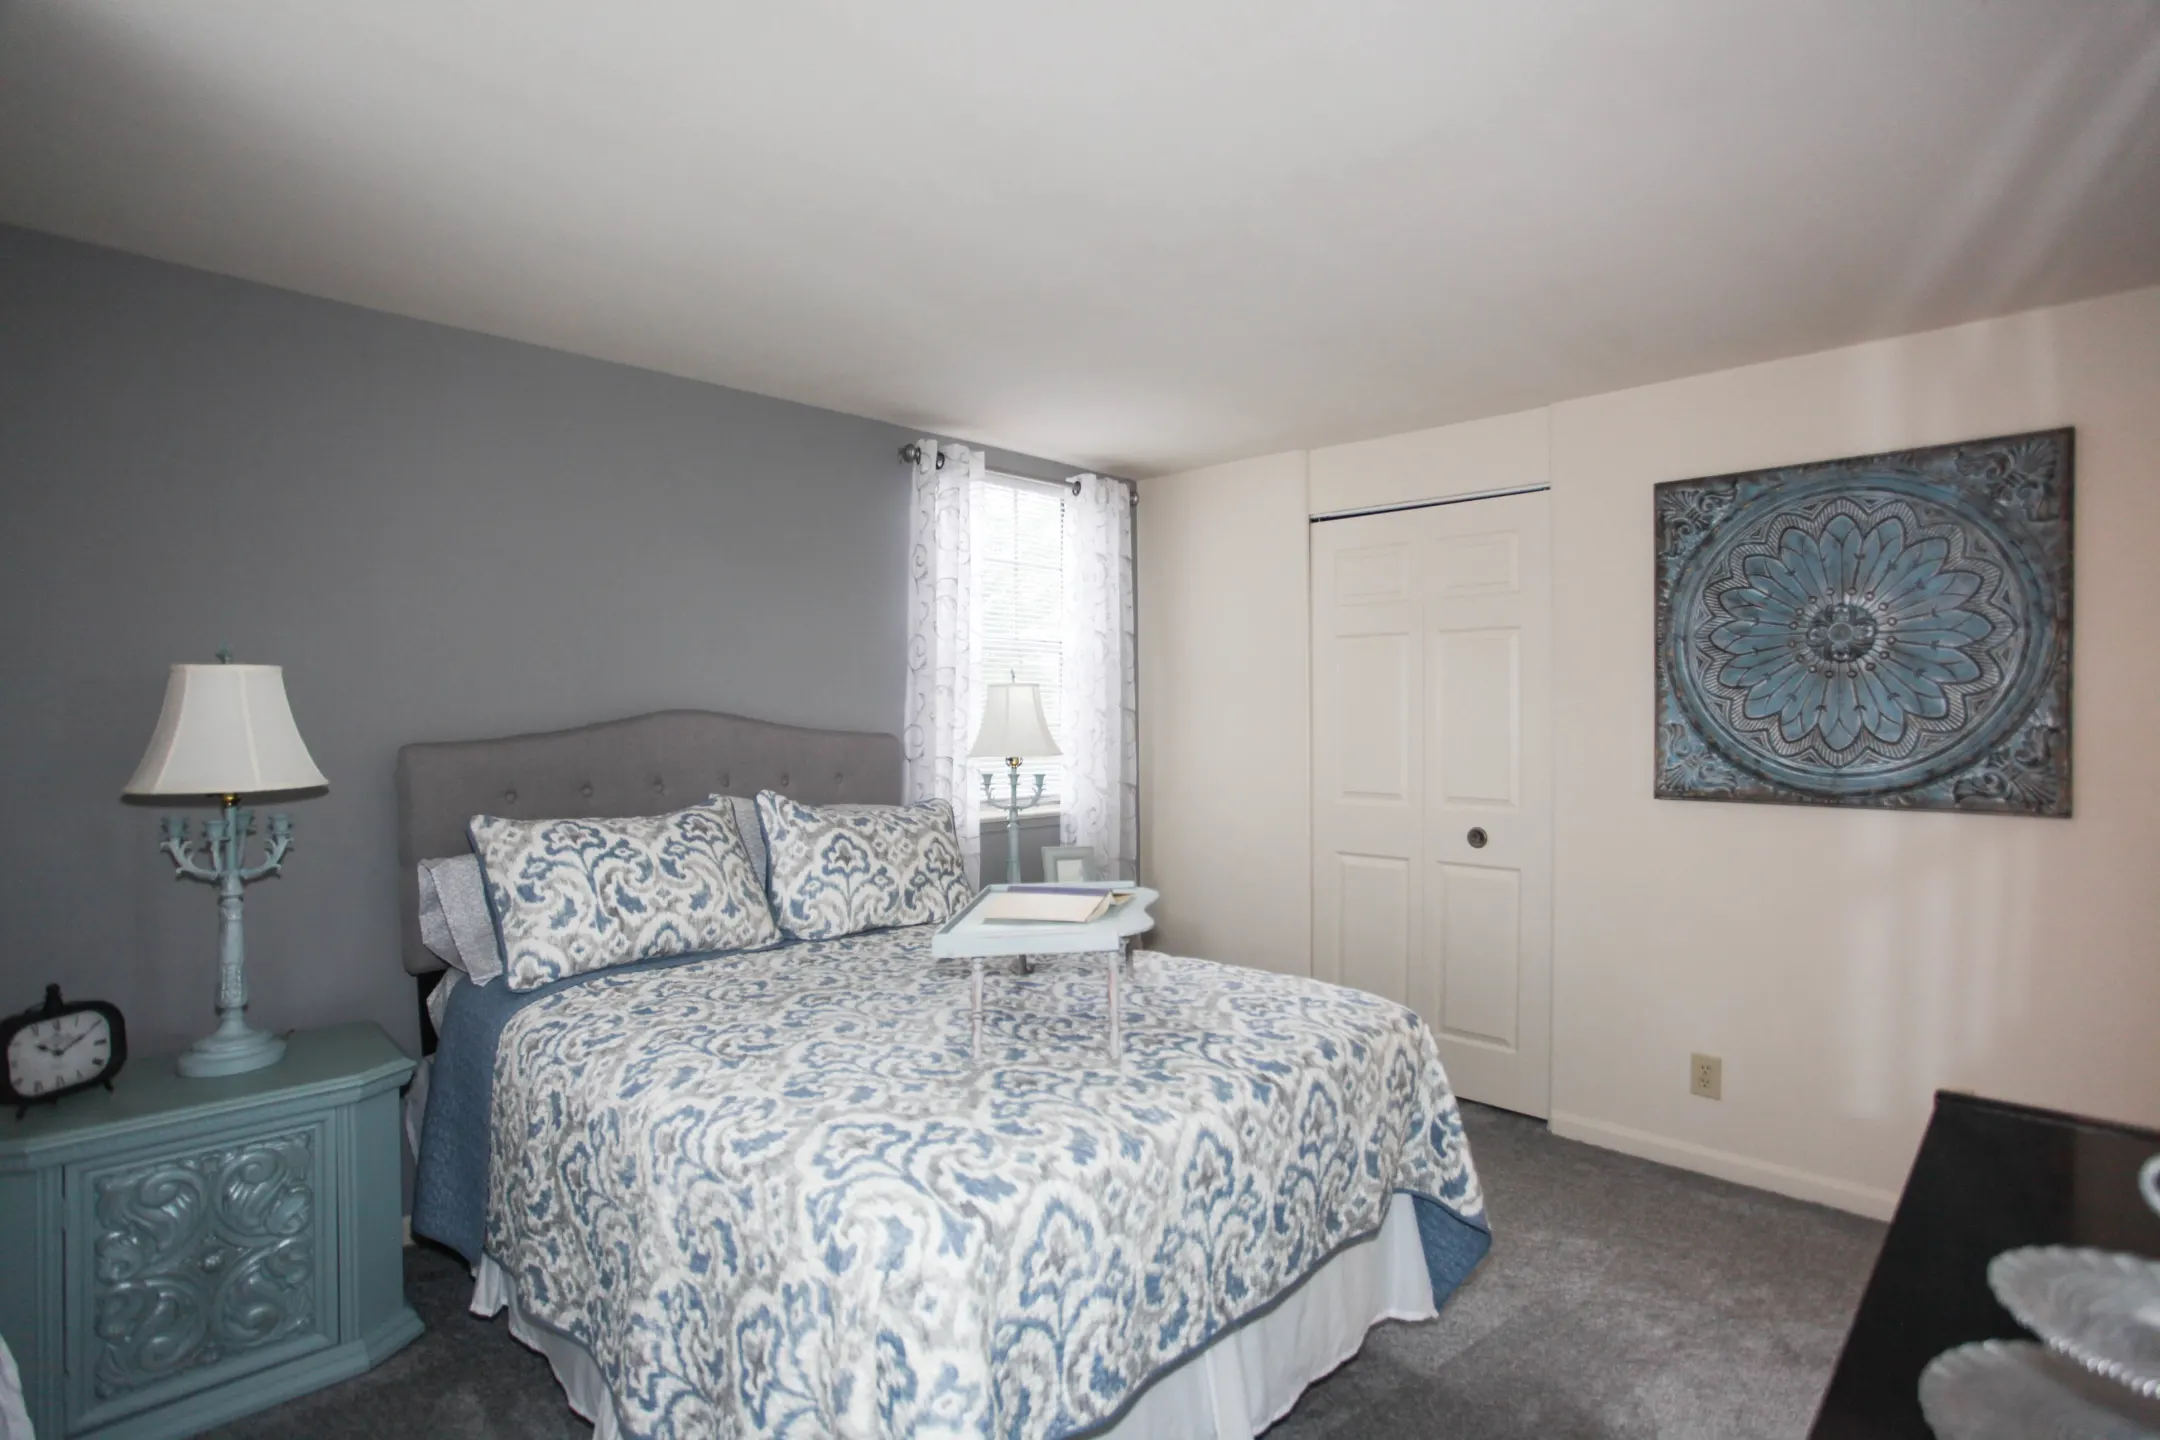 Bedroom - Gardenvillage Apartments & Townhouses - Baltimore, MD